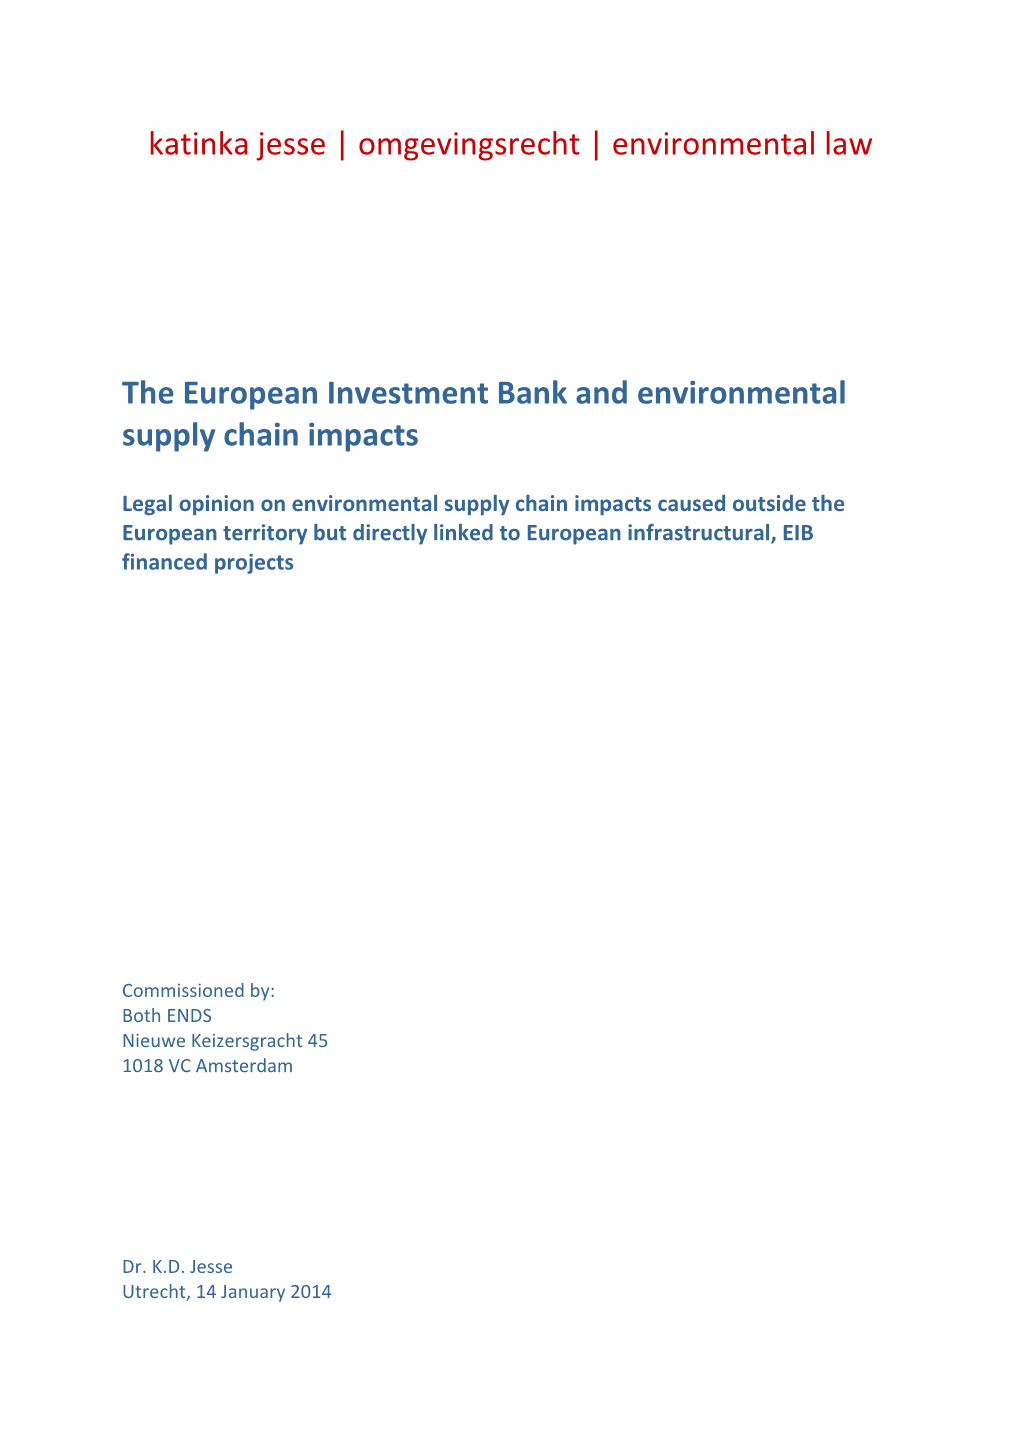 The European Investment Bank and Environmental Supply Chain Impacts